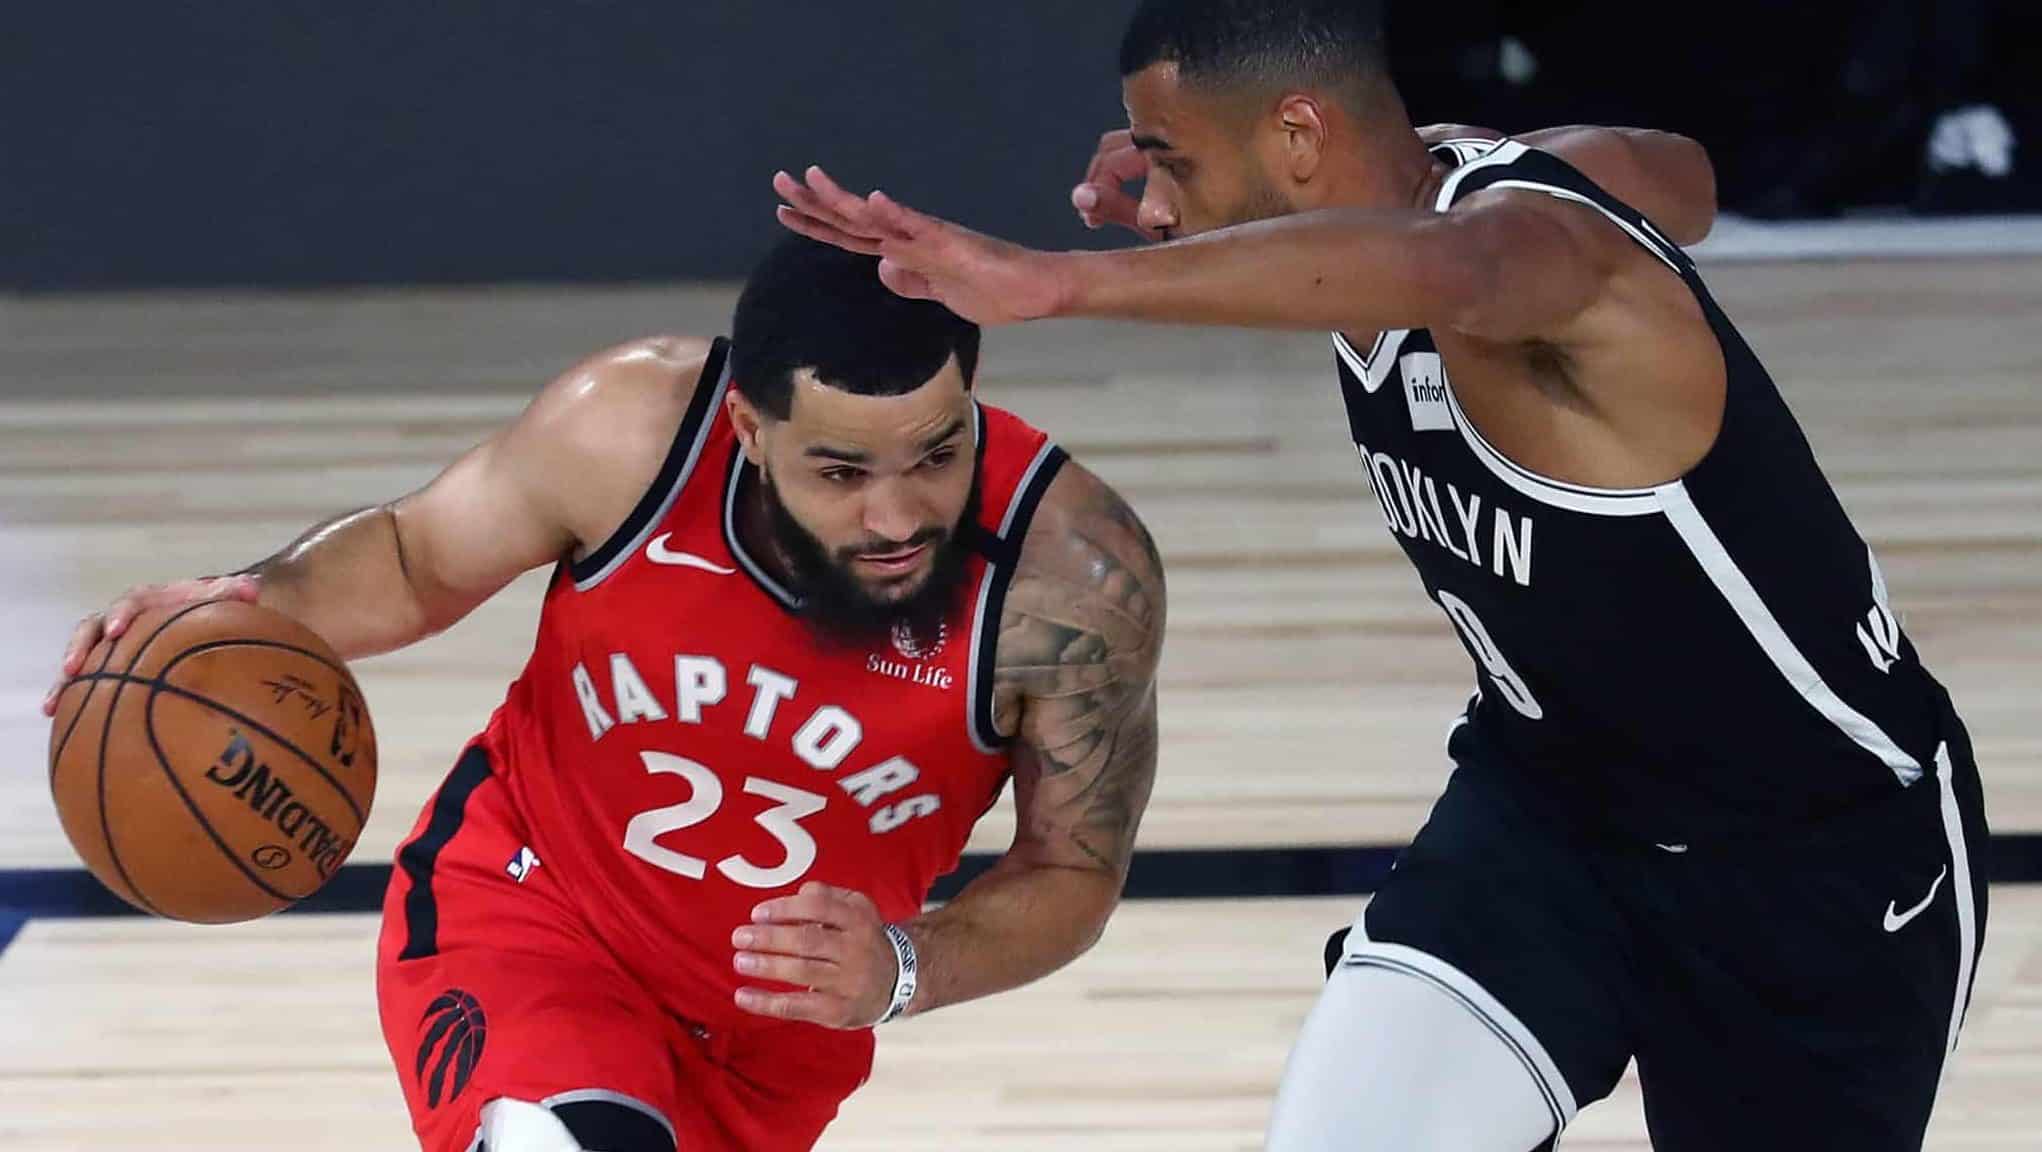 LAKE BUENA VISTA, FLORIDA - AUGUST 23: Fred VanVleet #23 of the Toronto Raptors moves the ball against Timothe Luwawu-Cabarrot #9 of the Brooklyn Nets during the first half in game four of the first round of the NBA playoffs at The Field House at ESPN Wide World Of Sports Complex on August 23, 2020 in Lake Buena Vista, Florida. NOTE TO USER: User expressly acknowledges and agrees that, by downloading and or using this photograph, User is consenting to the terms and conditions of the Getty Images License Agreement.